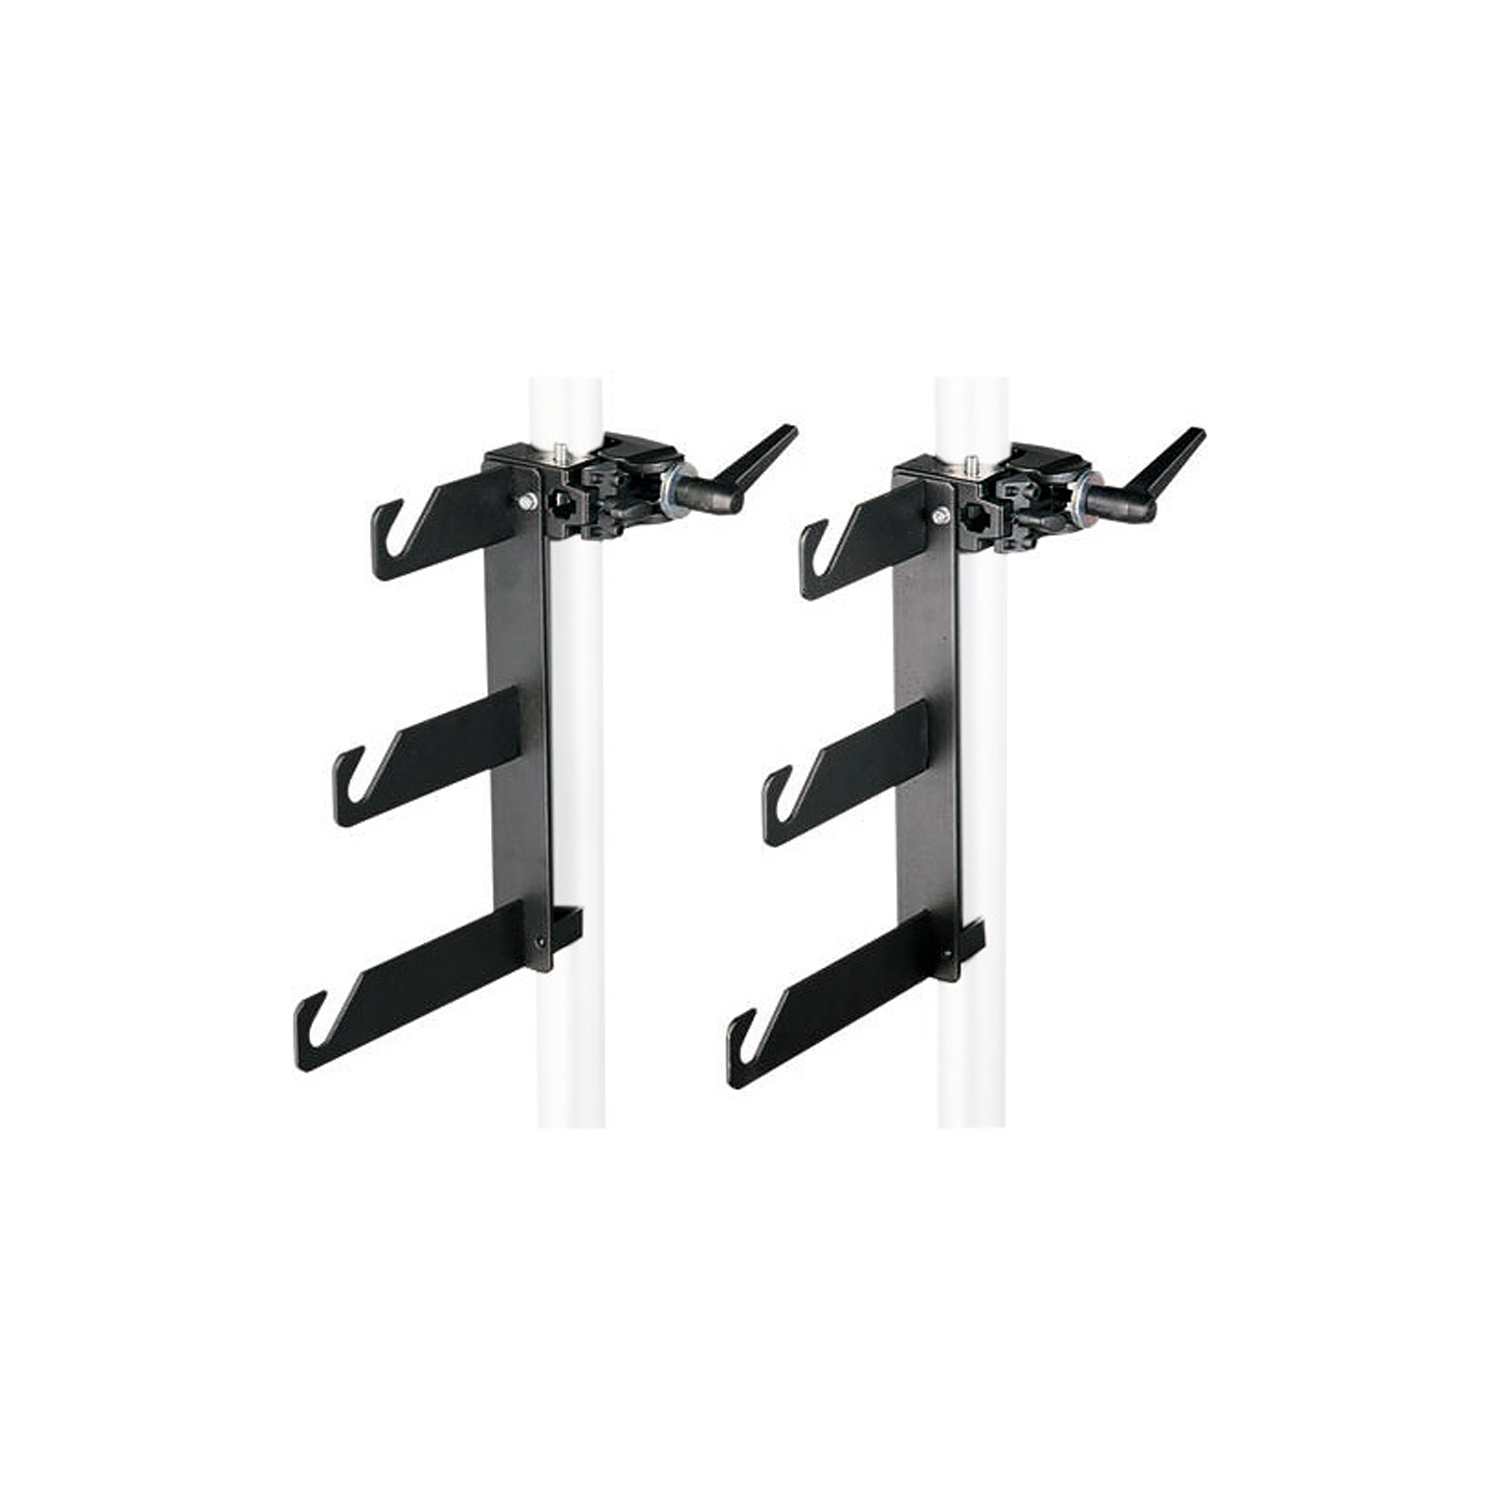 Manfrotto 044 Background Holder Hooks and Super Clamps for 3 Backgrounds - Set of 2